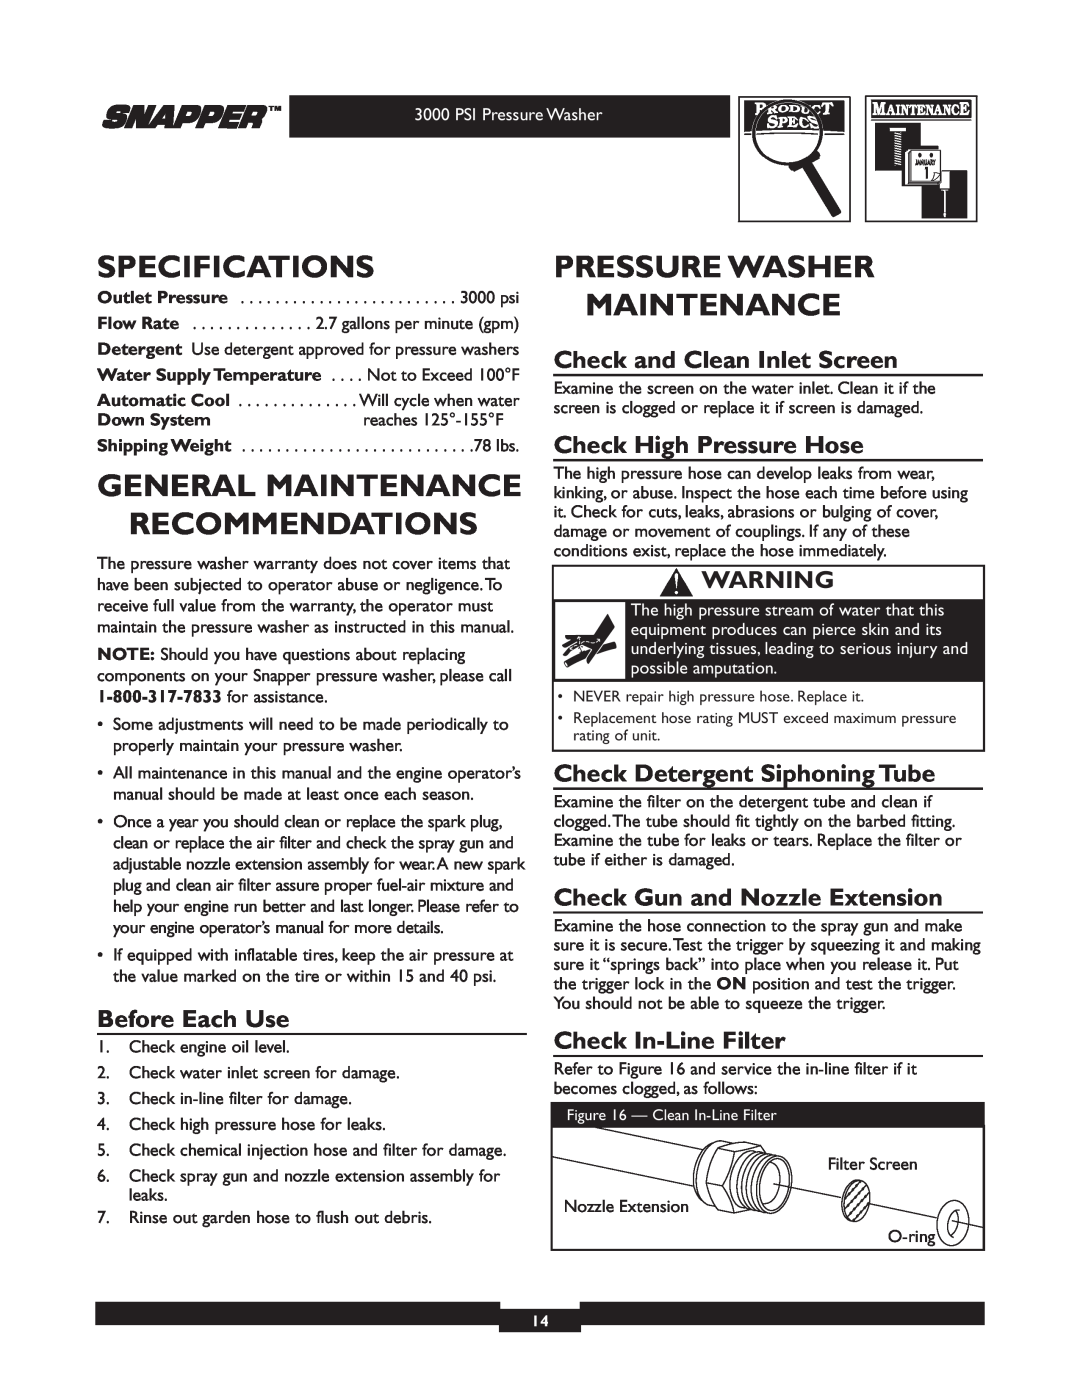 Snapper 020231-2 manual Specifications, General Maintenance Recommendations, Pressure Washer Maintenance, Before Each Use 